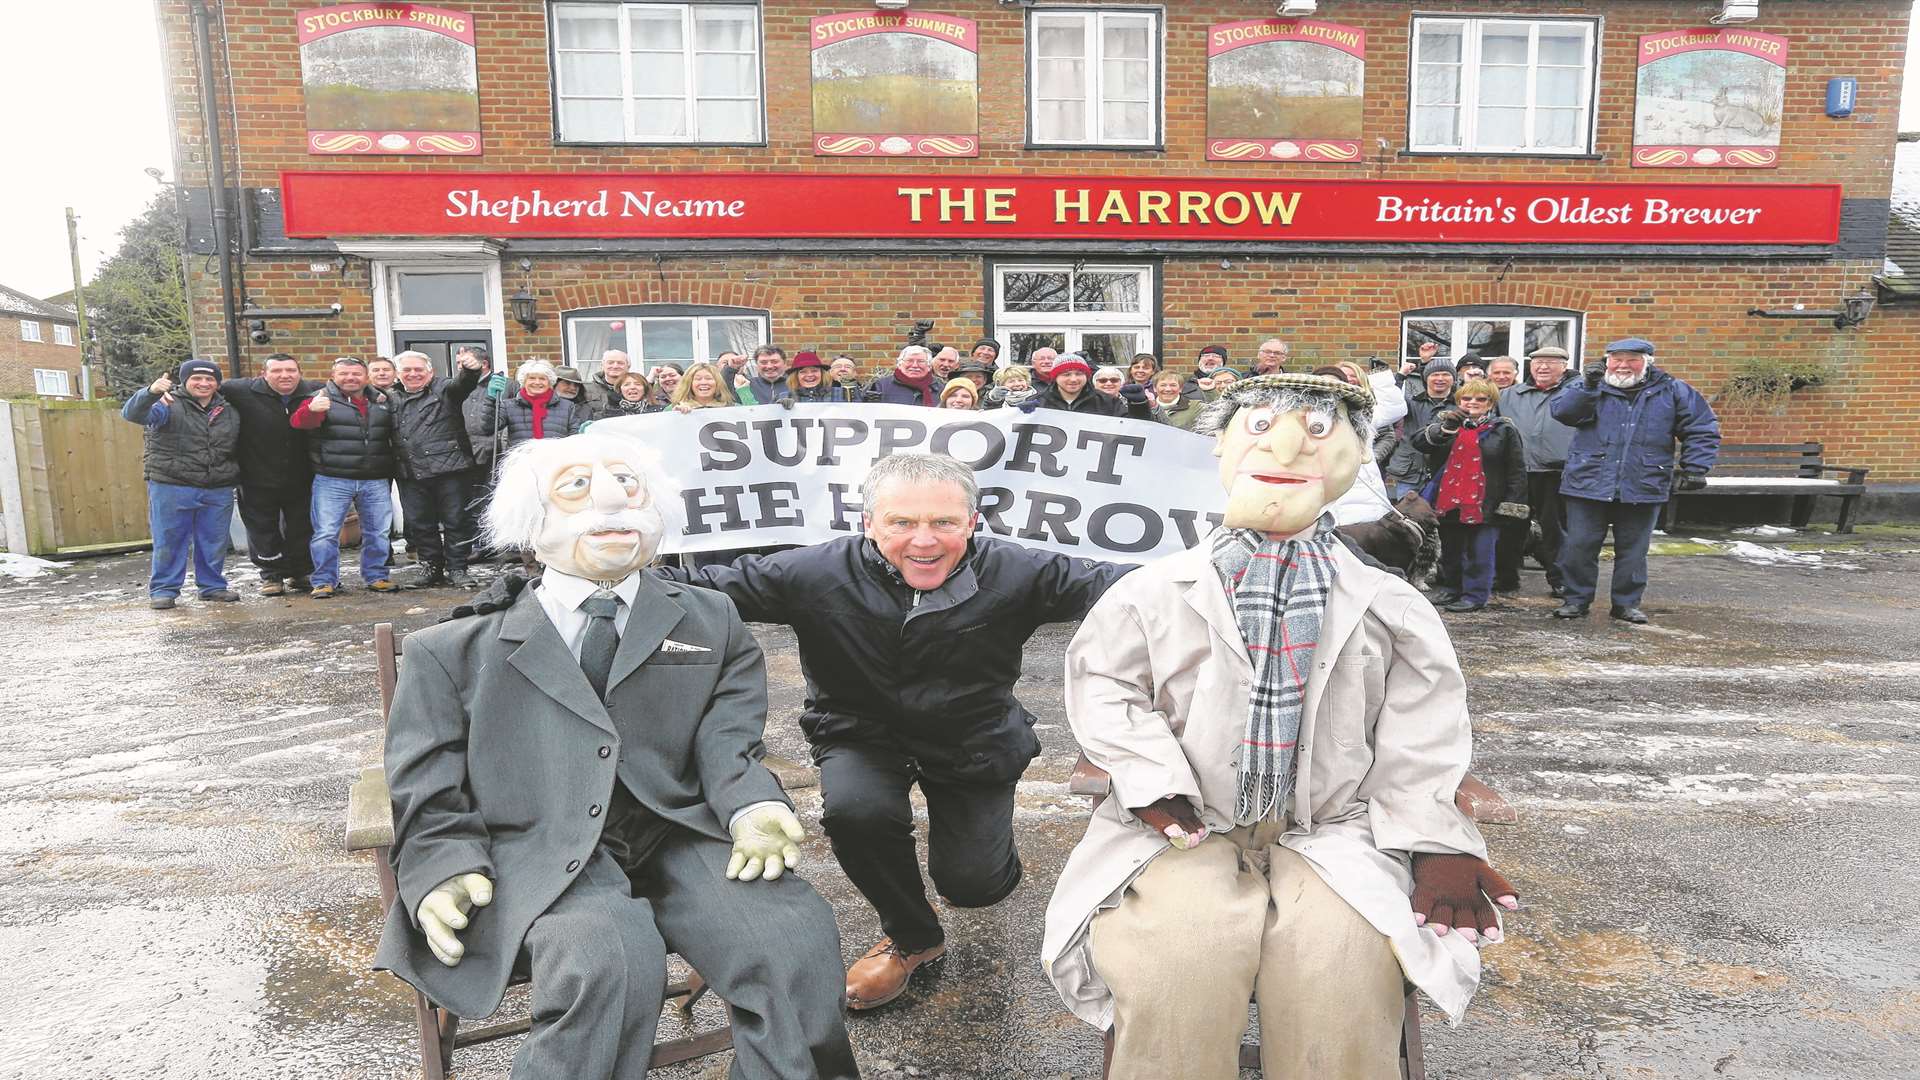 Chris Porter, two famous faces from the Muppet Show who helped promote the campaign and villagers who have saved the Harrow pub in Stockbury. Picture: John Westhrop